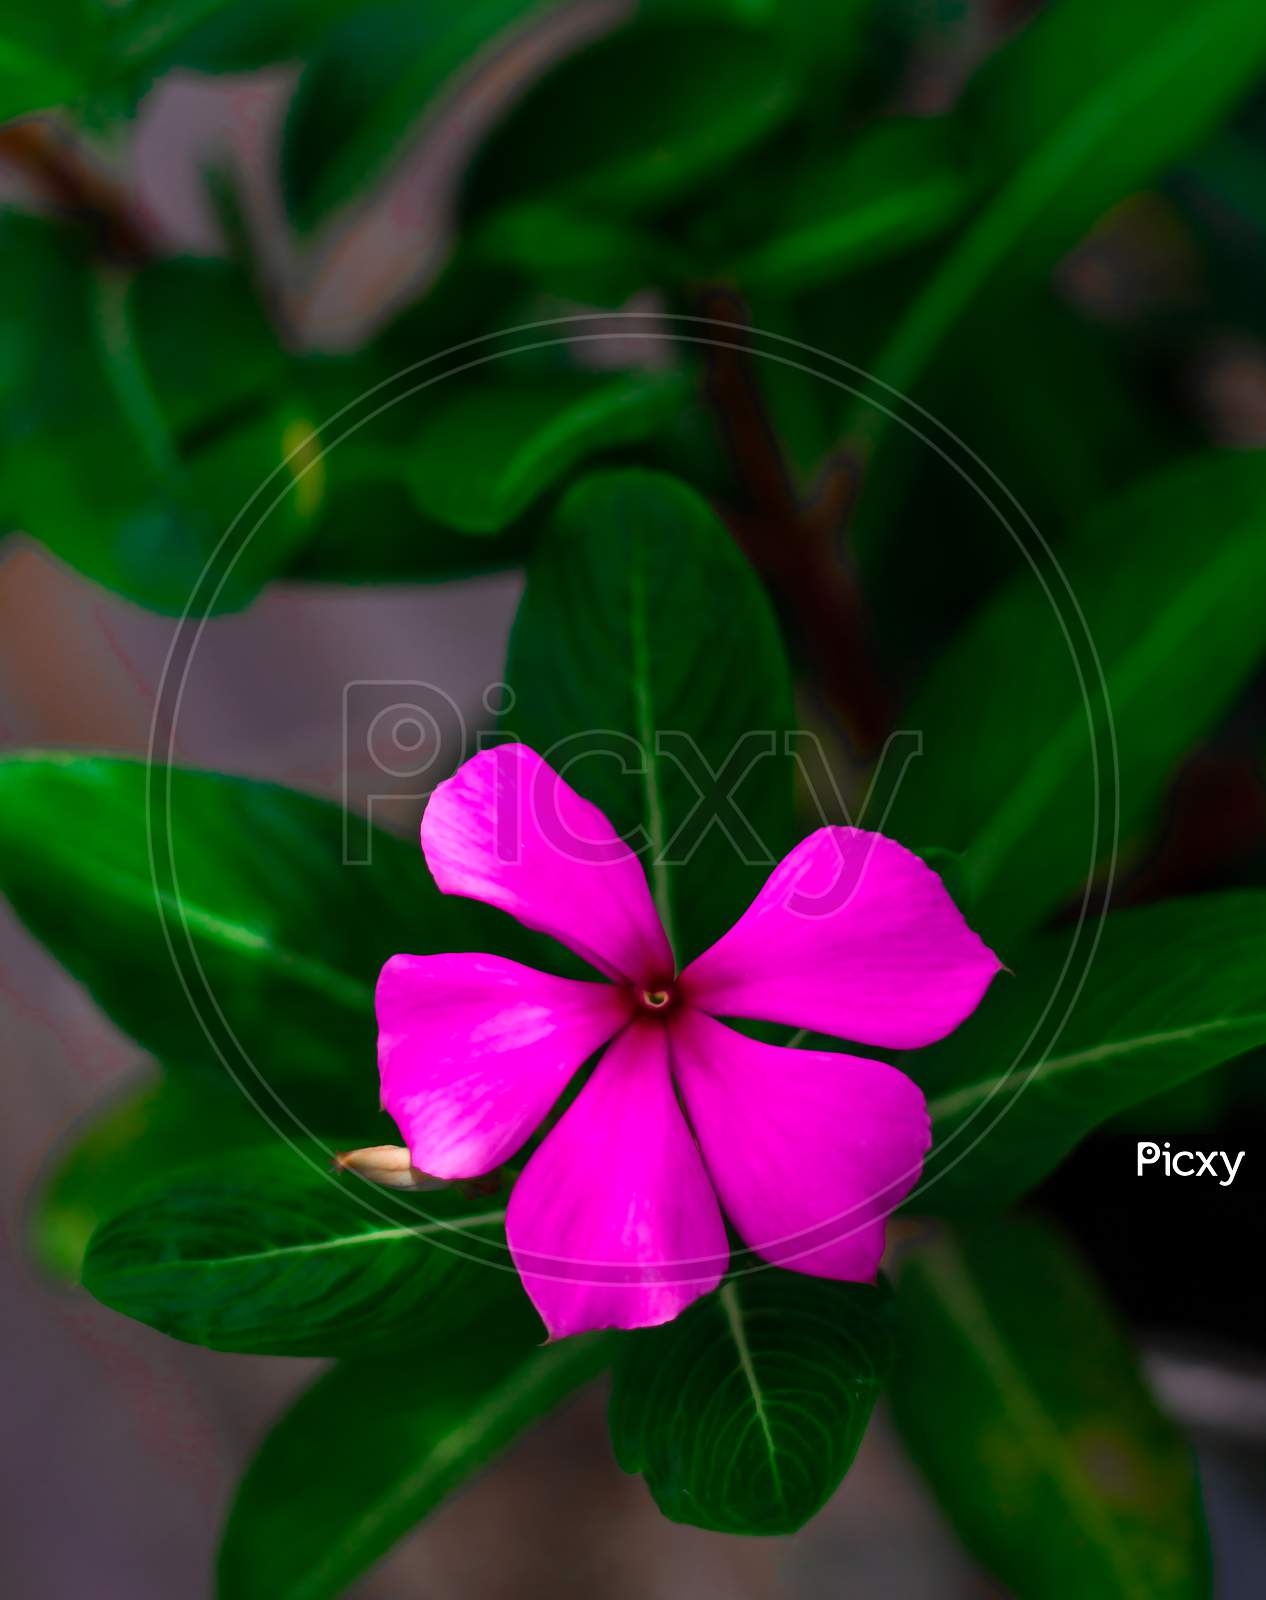 Periwinkle,rose periwinkle,Catharanthus roseus, commonly known as bright eyes, Cape periwinkle, graveyard plant, Madagascar periwinkle, old maid, pink periwinkle, rose periwinkle